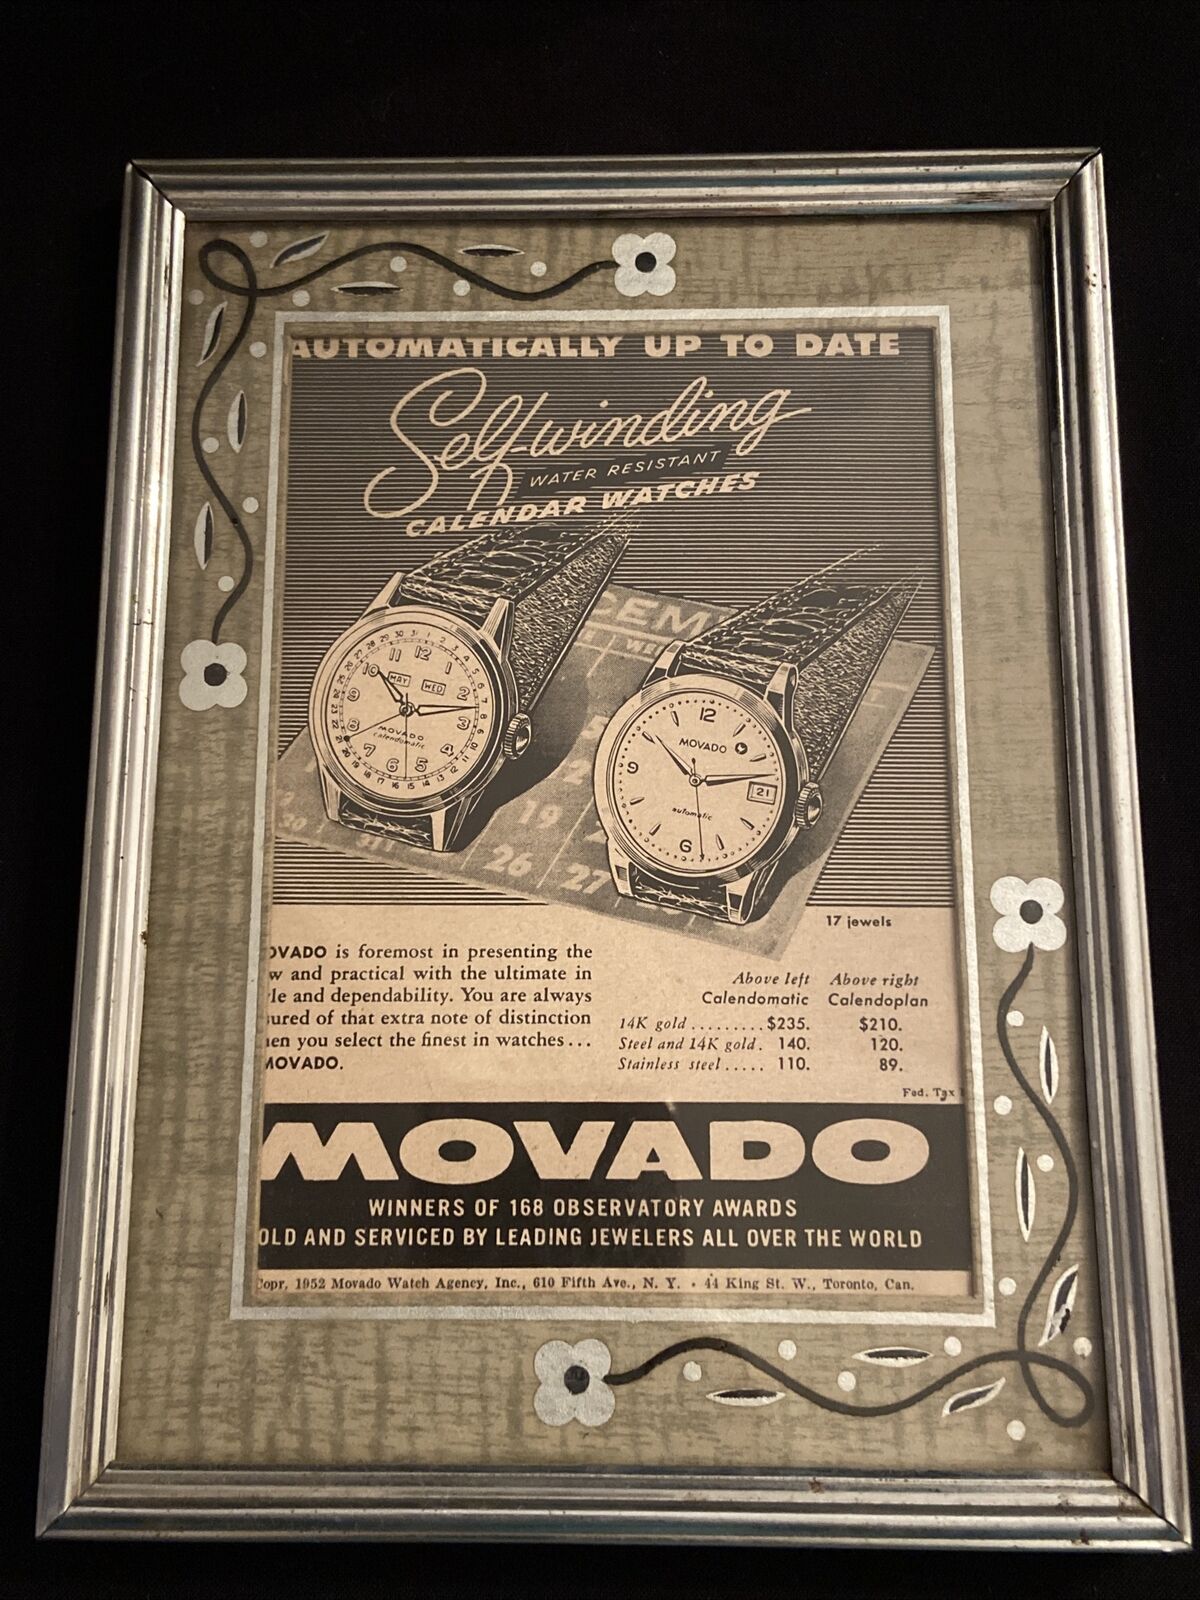 Vintage Movado Advertising 1952 Calendomatic Calendoplan Watches Ad Framed